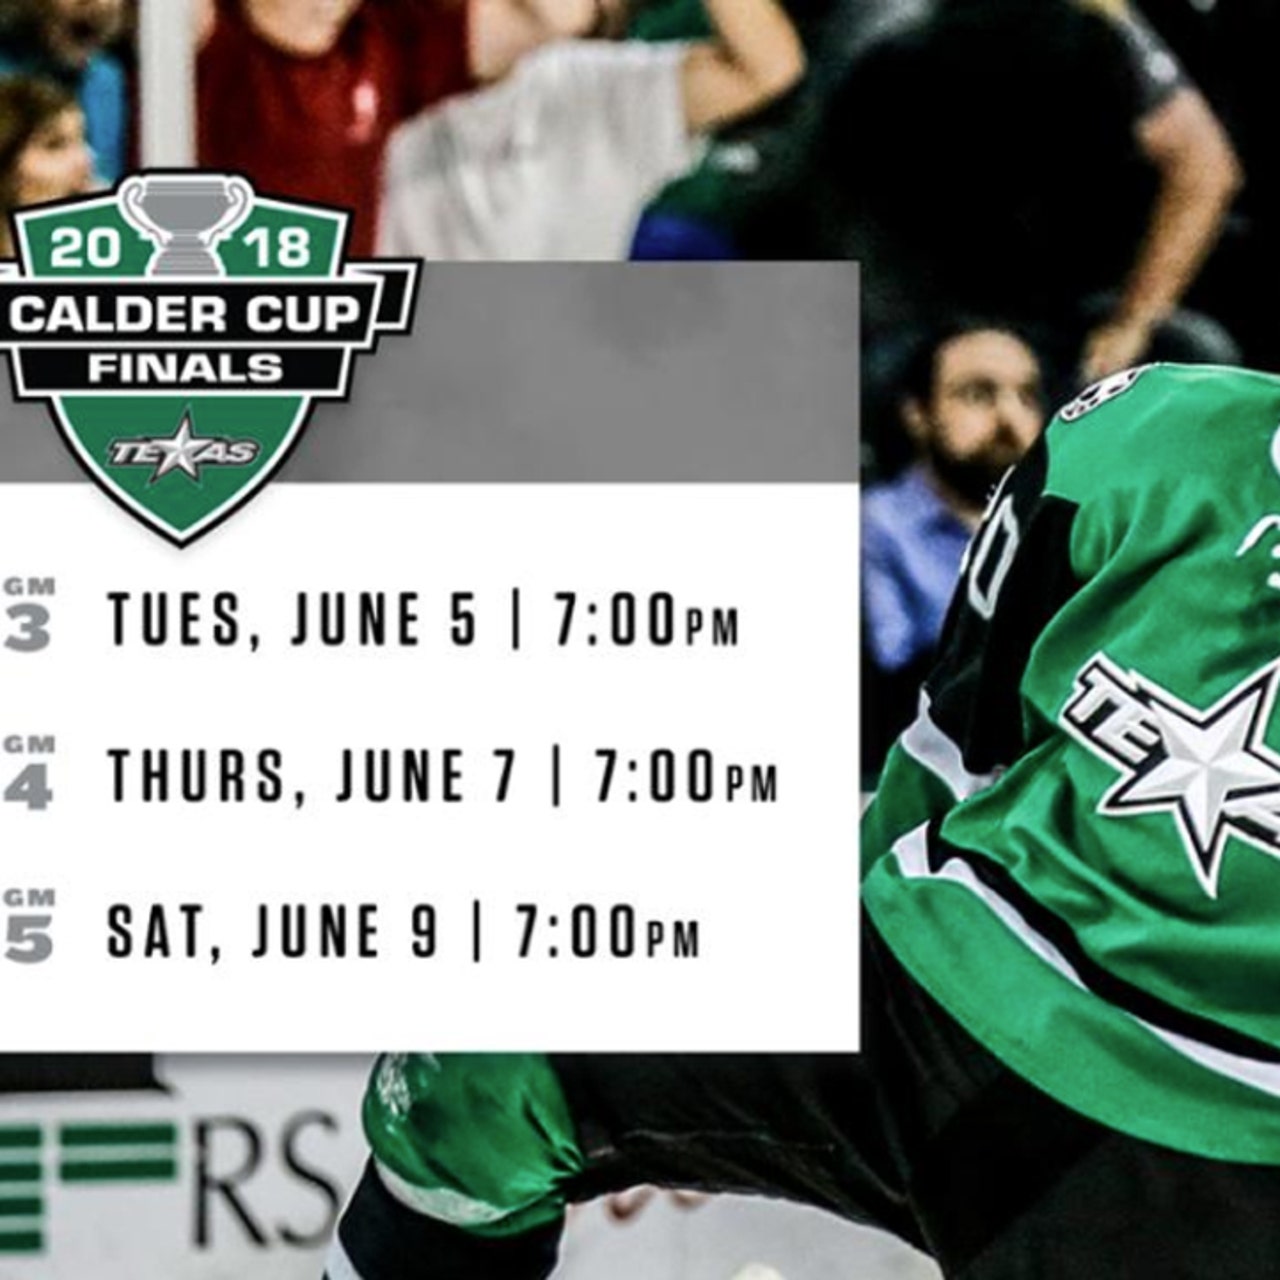 Watch Games 3, 4 and 5 of the Calder Cup Finals on FOX Sports Southwest FOX Sports